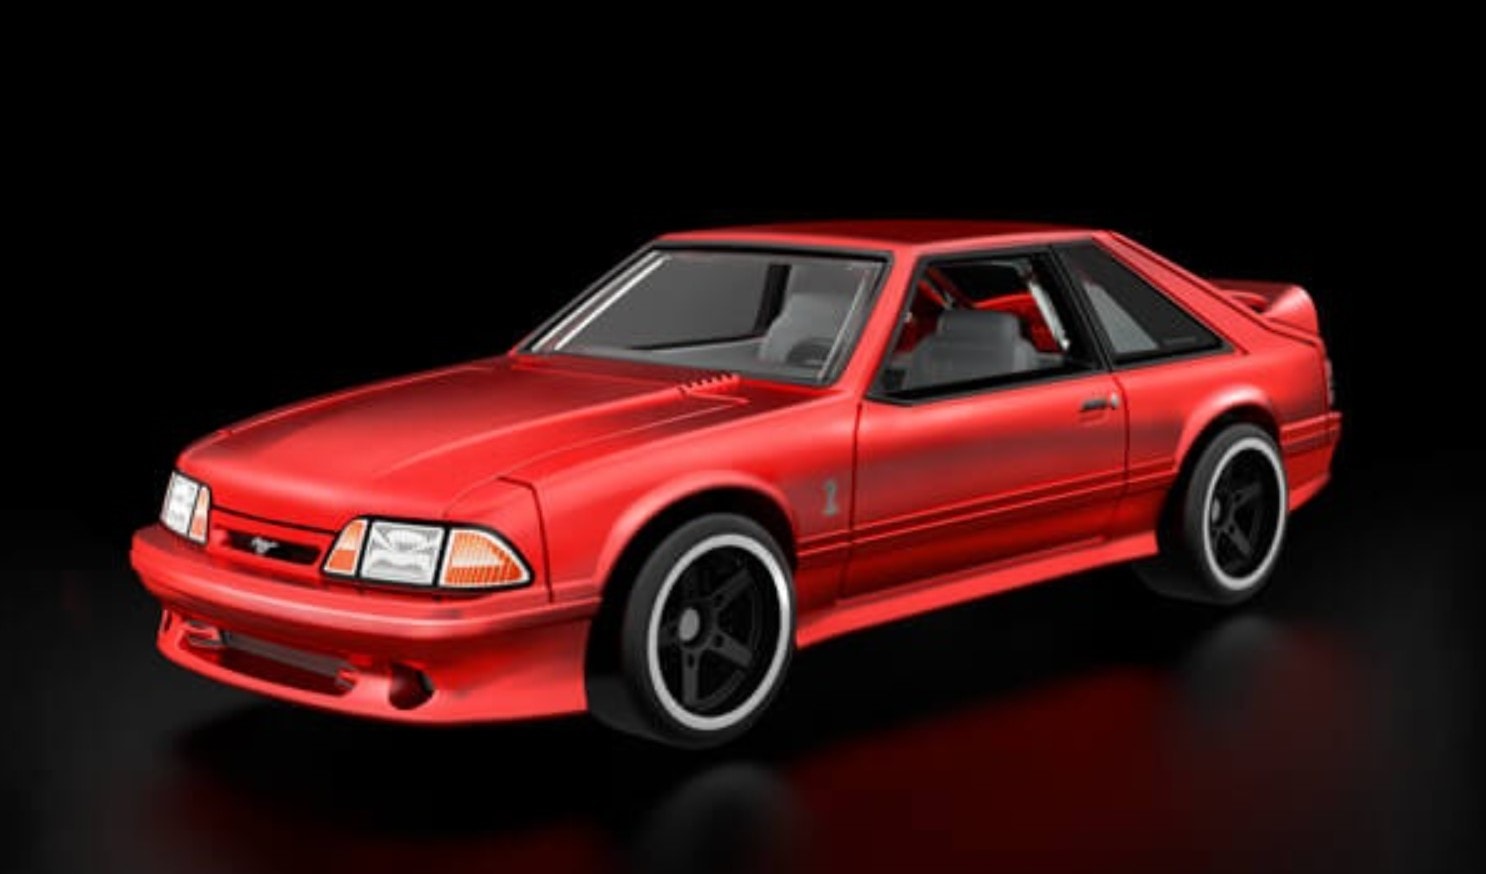 It’s not just us that have a sweet spot for the Fox-Body, one mod...